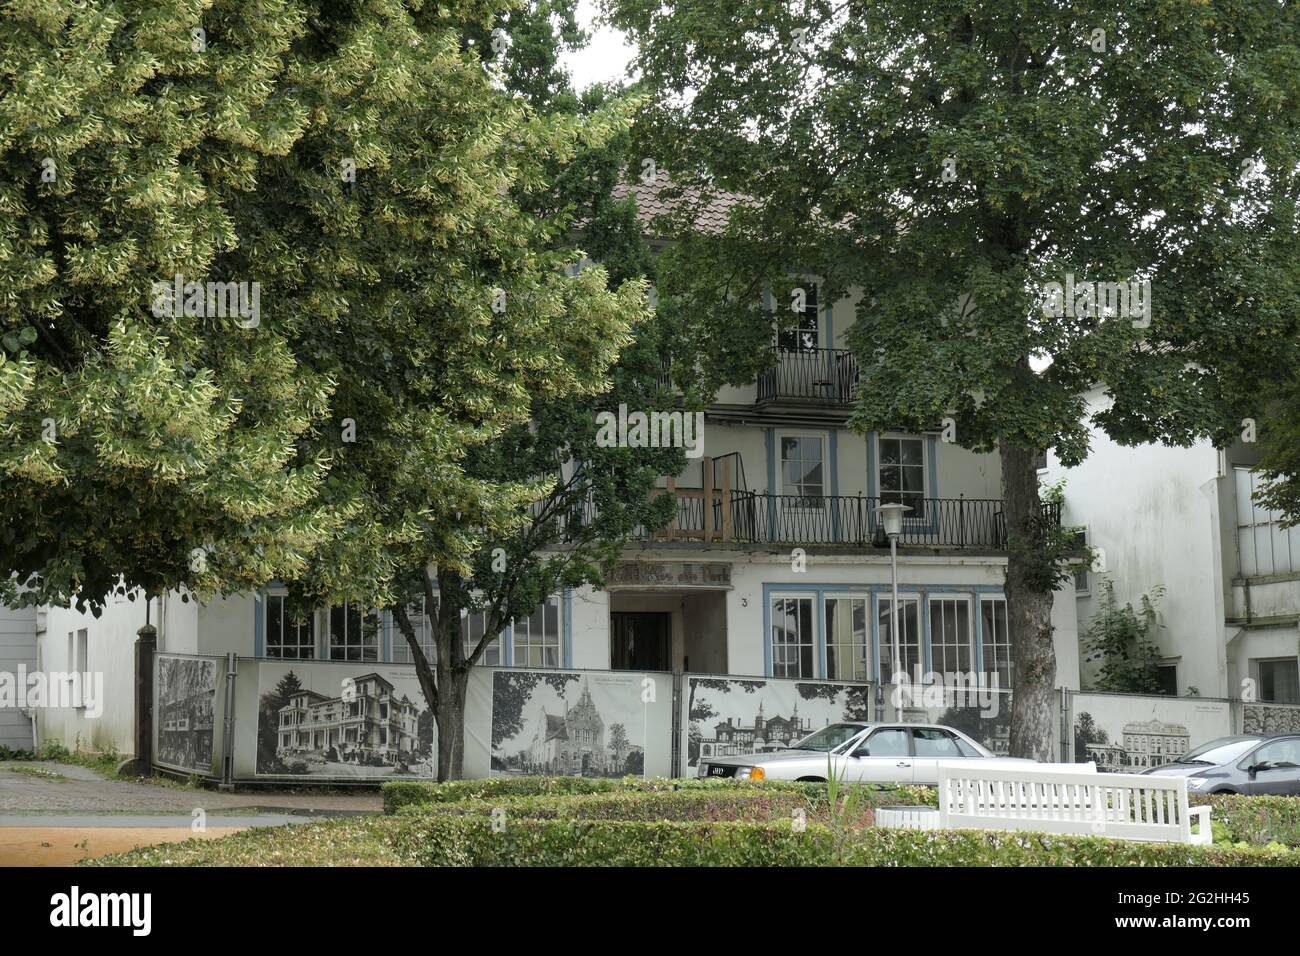 Vacant dissolved hotel, Bad Pyrmont, Weser Uplands, Lower Saxony, Germany Stock Photo